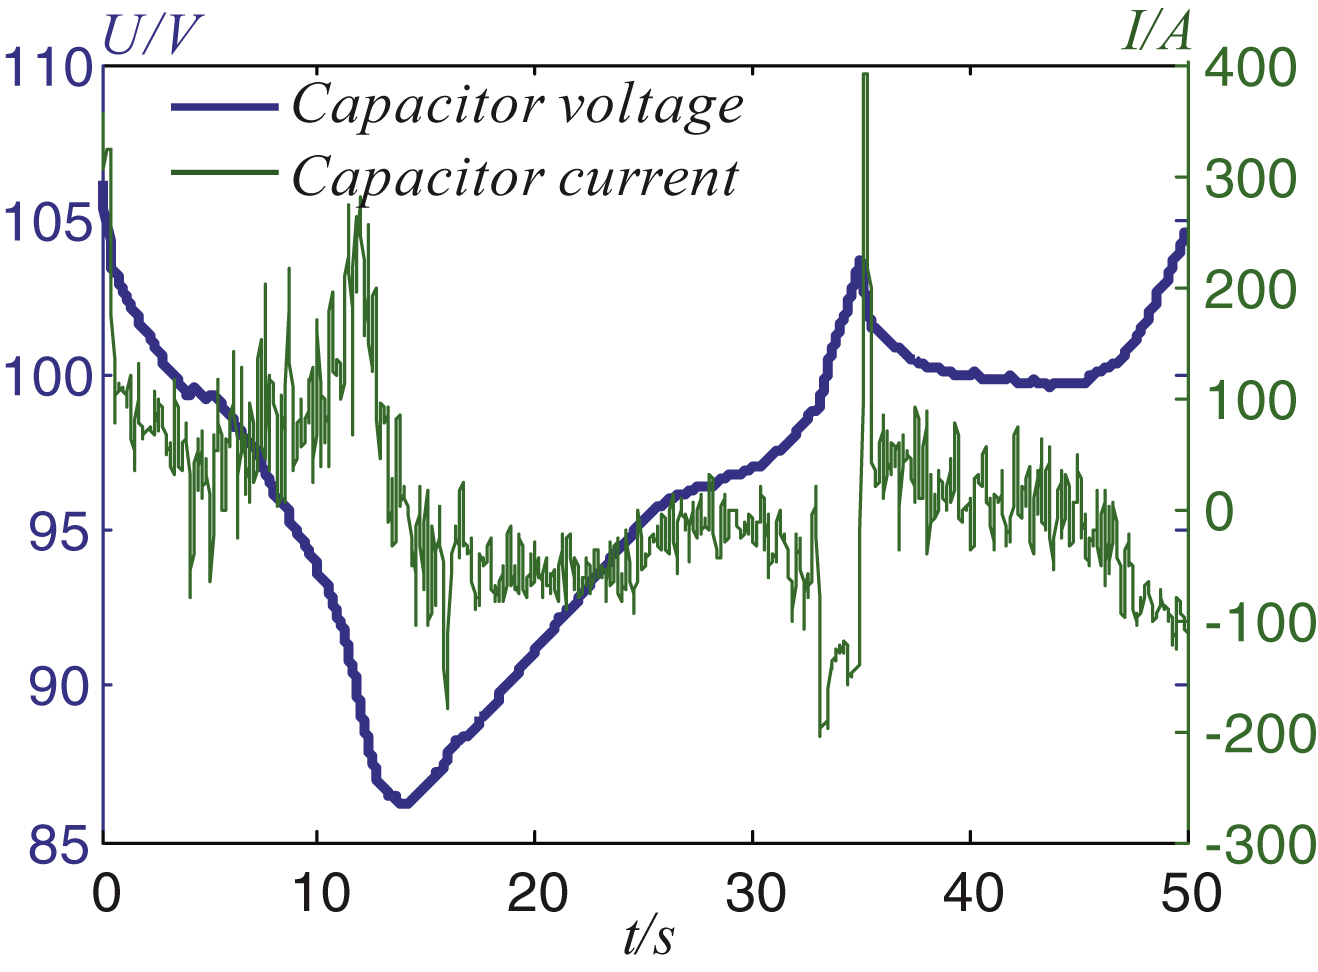 Current and voltage of the capacitor.